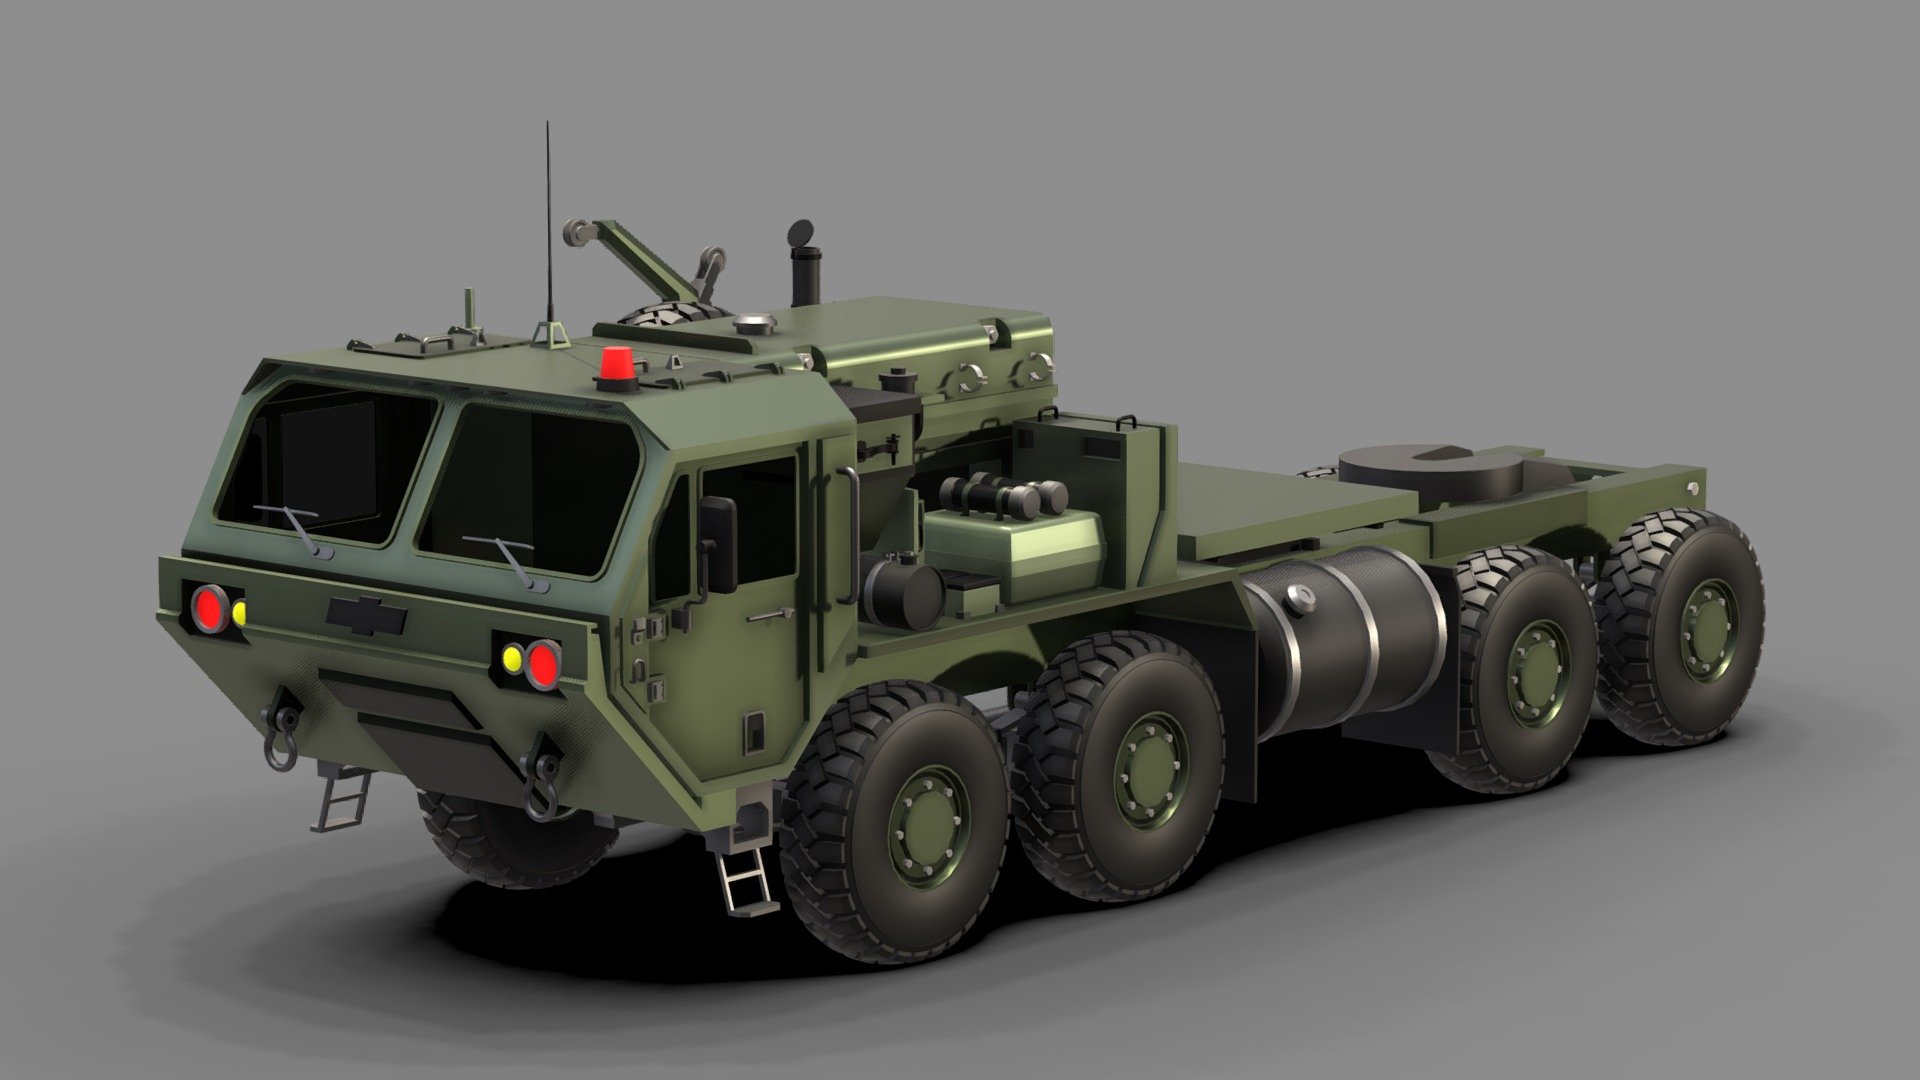 The Heavy Expanded Mobility Tactical Truck (HEMTT) is an eight-wheel drive, diesel-powered, 10-short-ton (9,100 kg) tactical truck. The M977 HEMTT first entered service in 1982 with the United States Army as a replacement for the M520 Goer, and since that date has remained in production for the U.S. Army and other nations 3d model